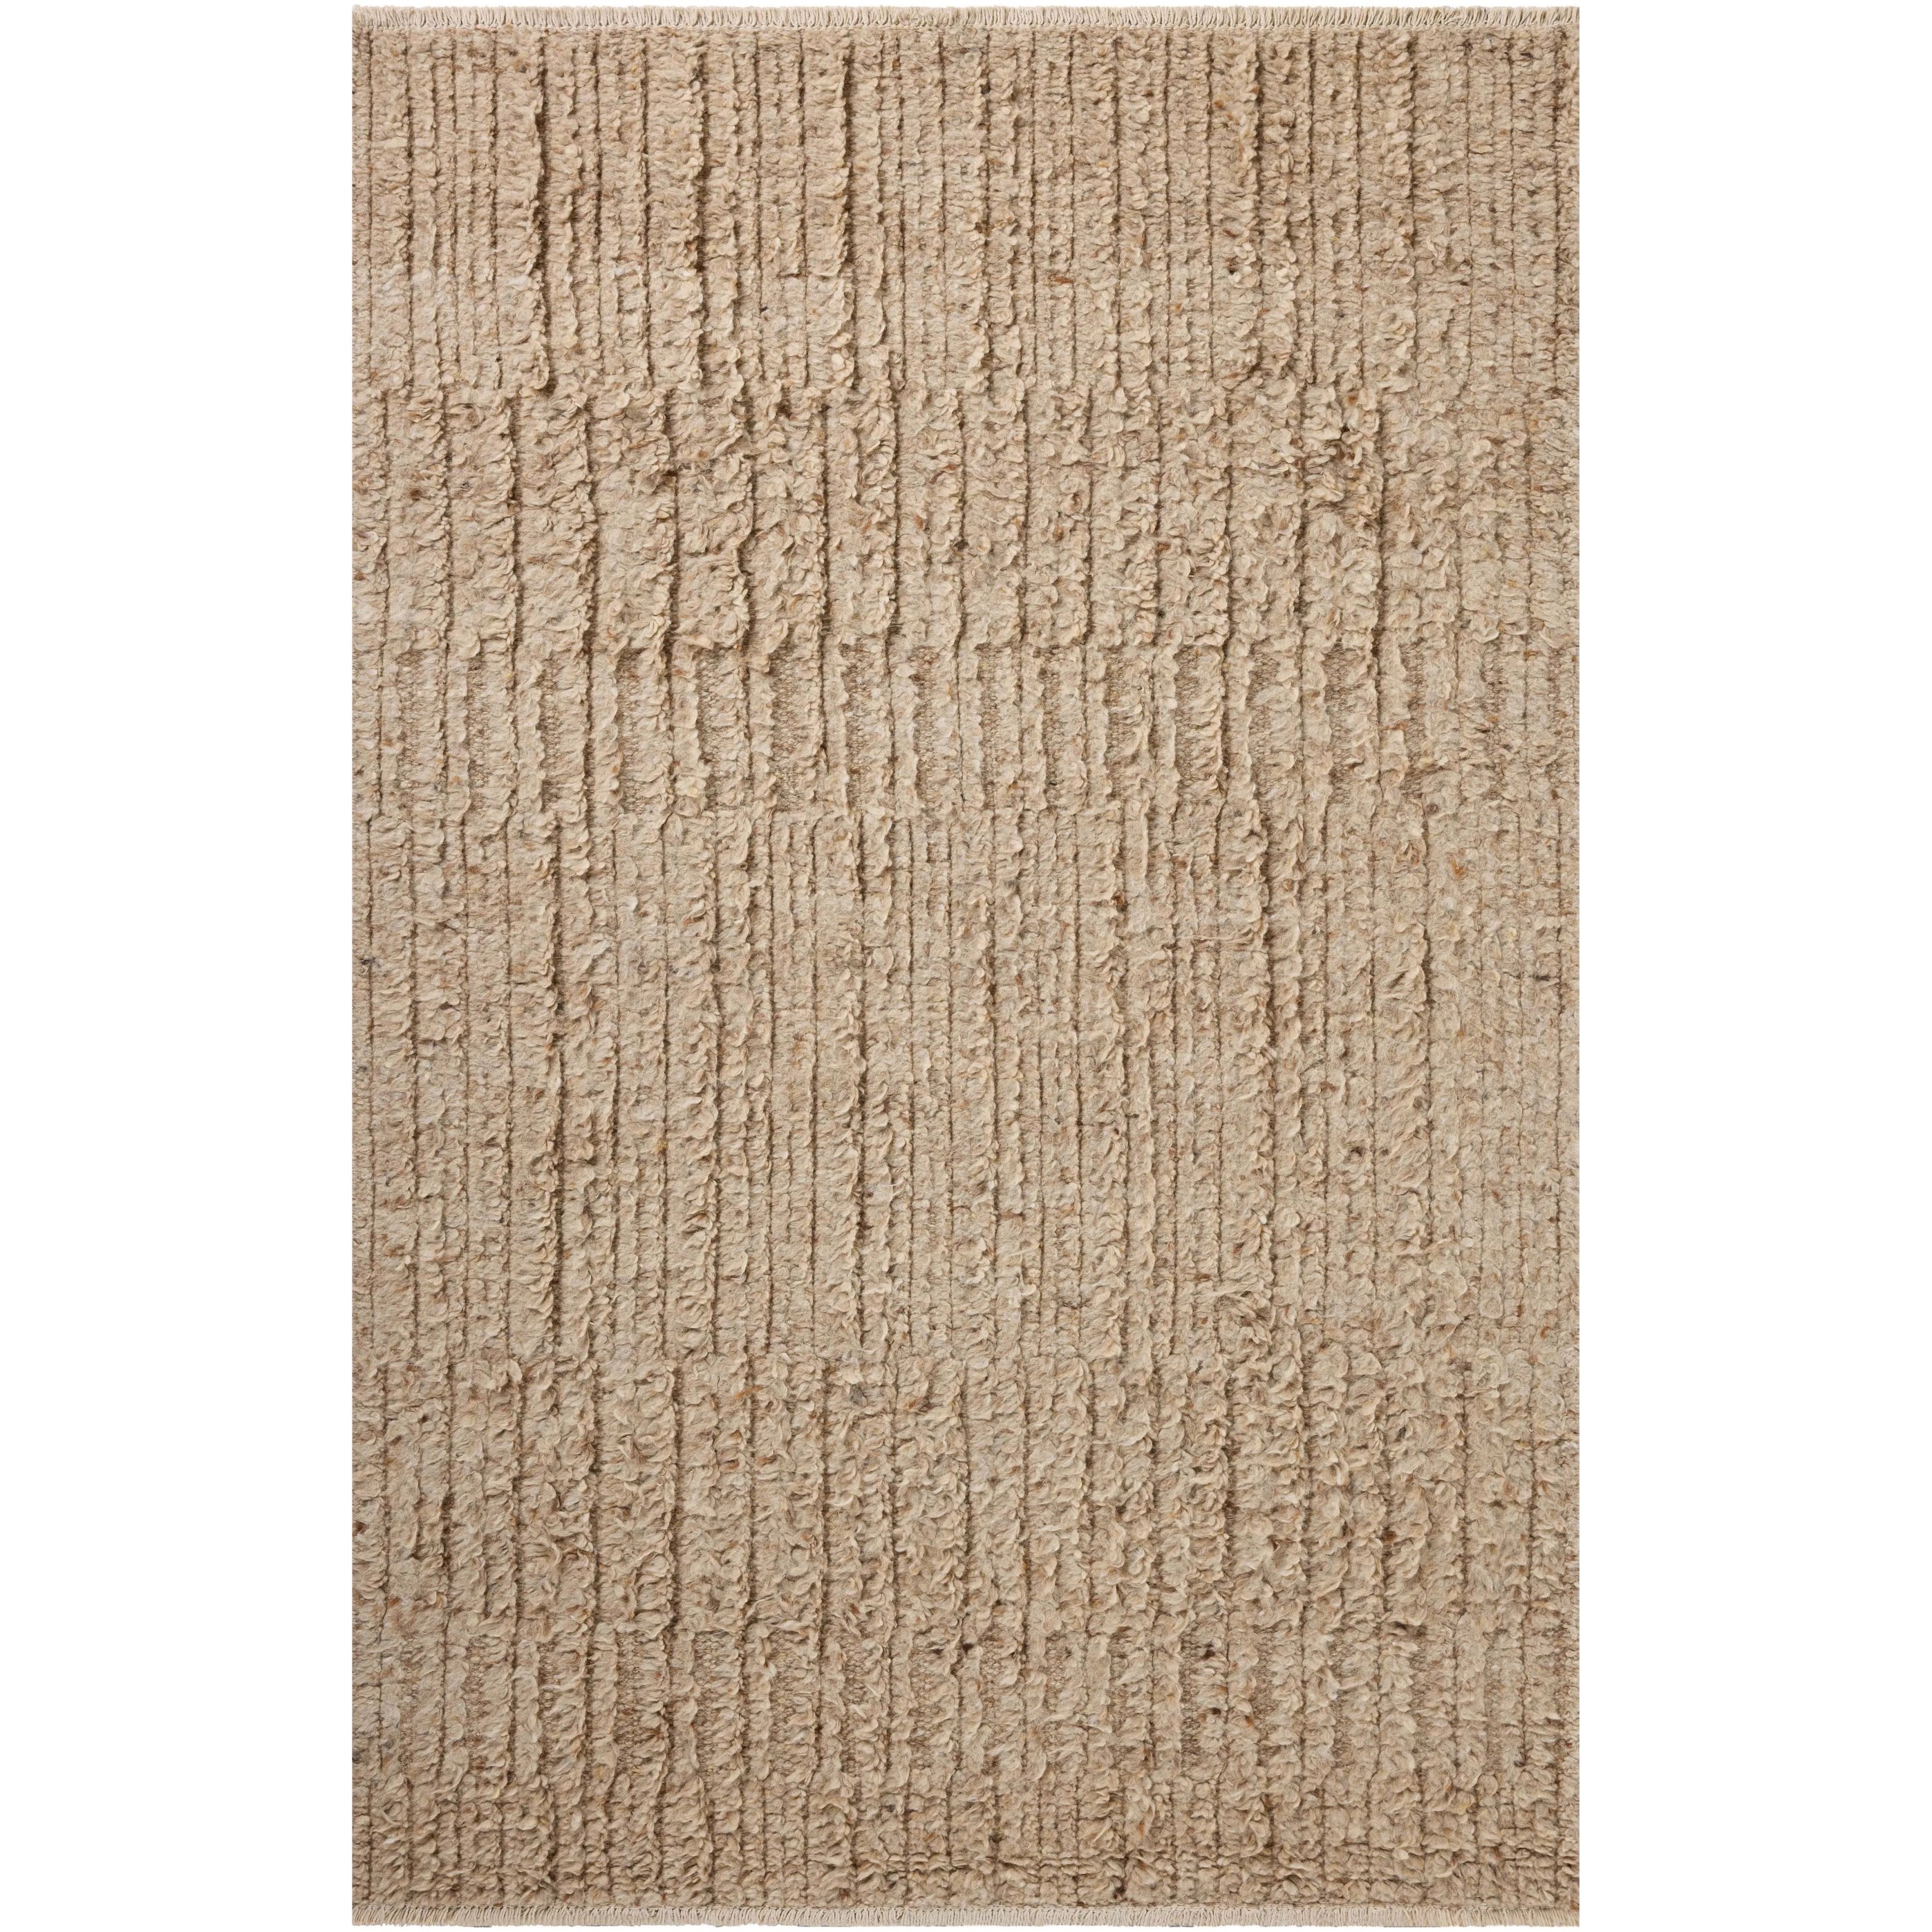 Irresistible to walk upon, the Dana Sand Rug by Brigette Romanek x Loloi has a high-low texture that alternates between a subtly shaggy pile and a soft base. Horizontal broken stripes give the area rug a fresh and energized structure, while a finish of fringe along the edges accentuates its sense of movement. Amethyst Home provides interior design, new home construction design consulting, vintage area rugs, and lighting in the Portland metro area.